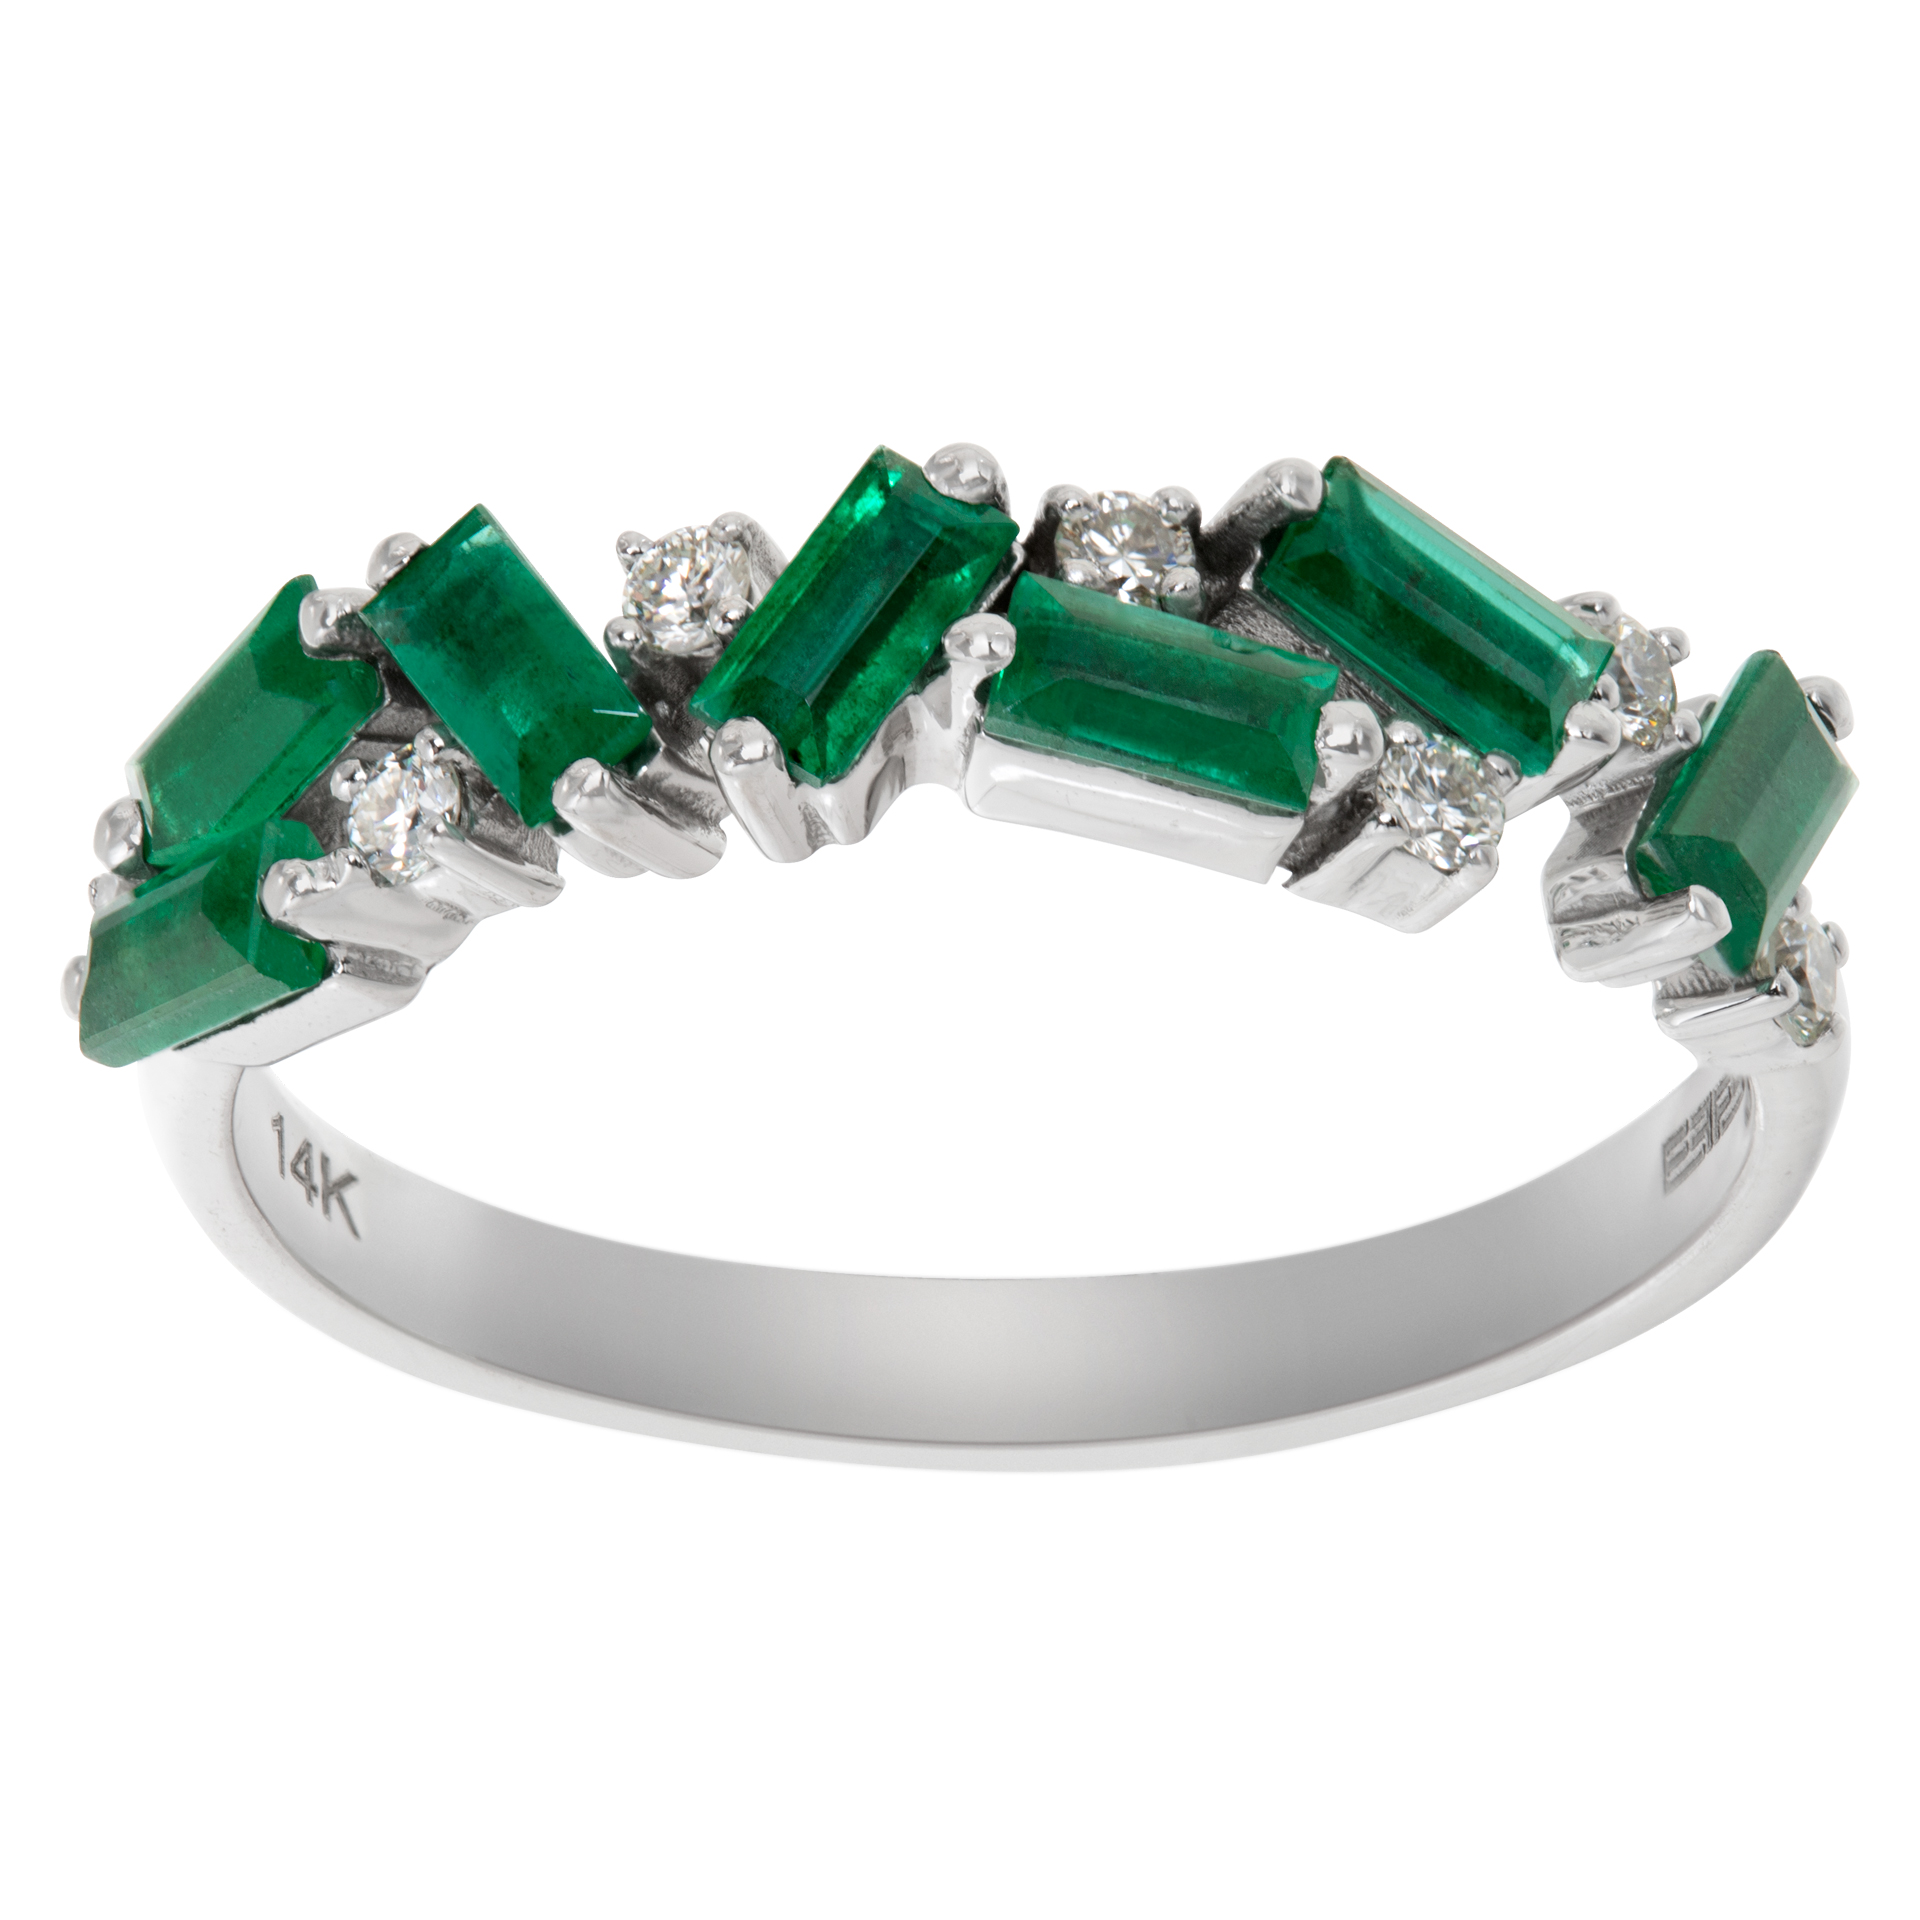 14k white gold ring with approx 0.55 cts in emeralds and approx 0.25 cts of accent diamonds. Size 6.75.